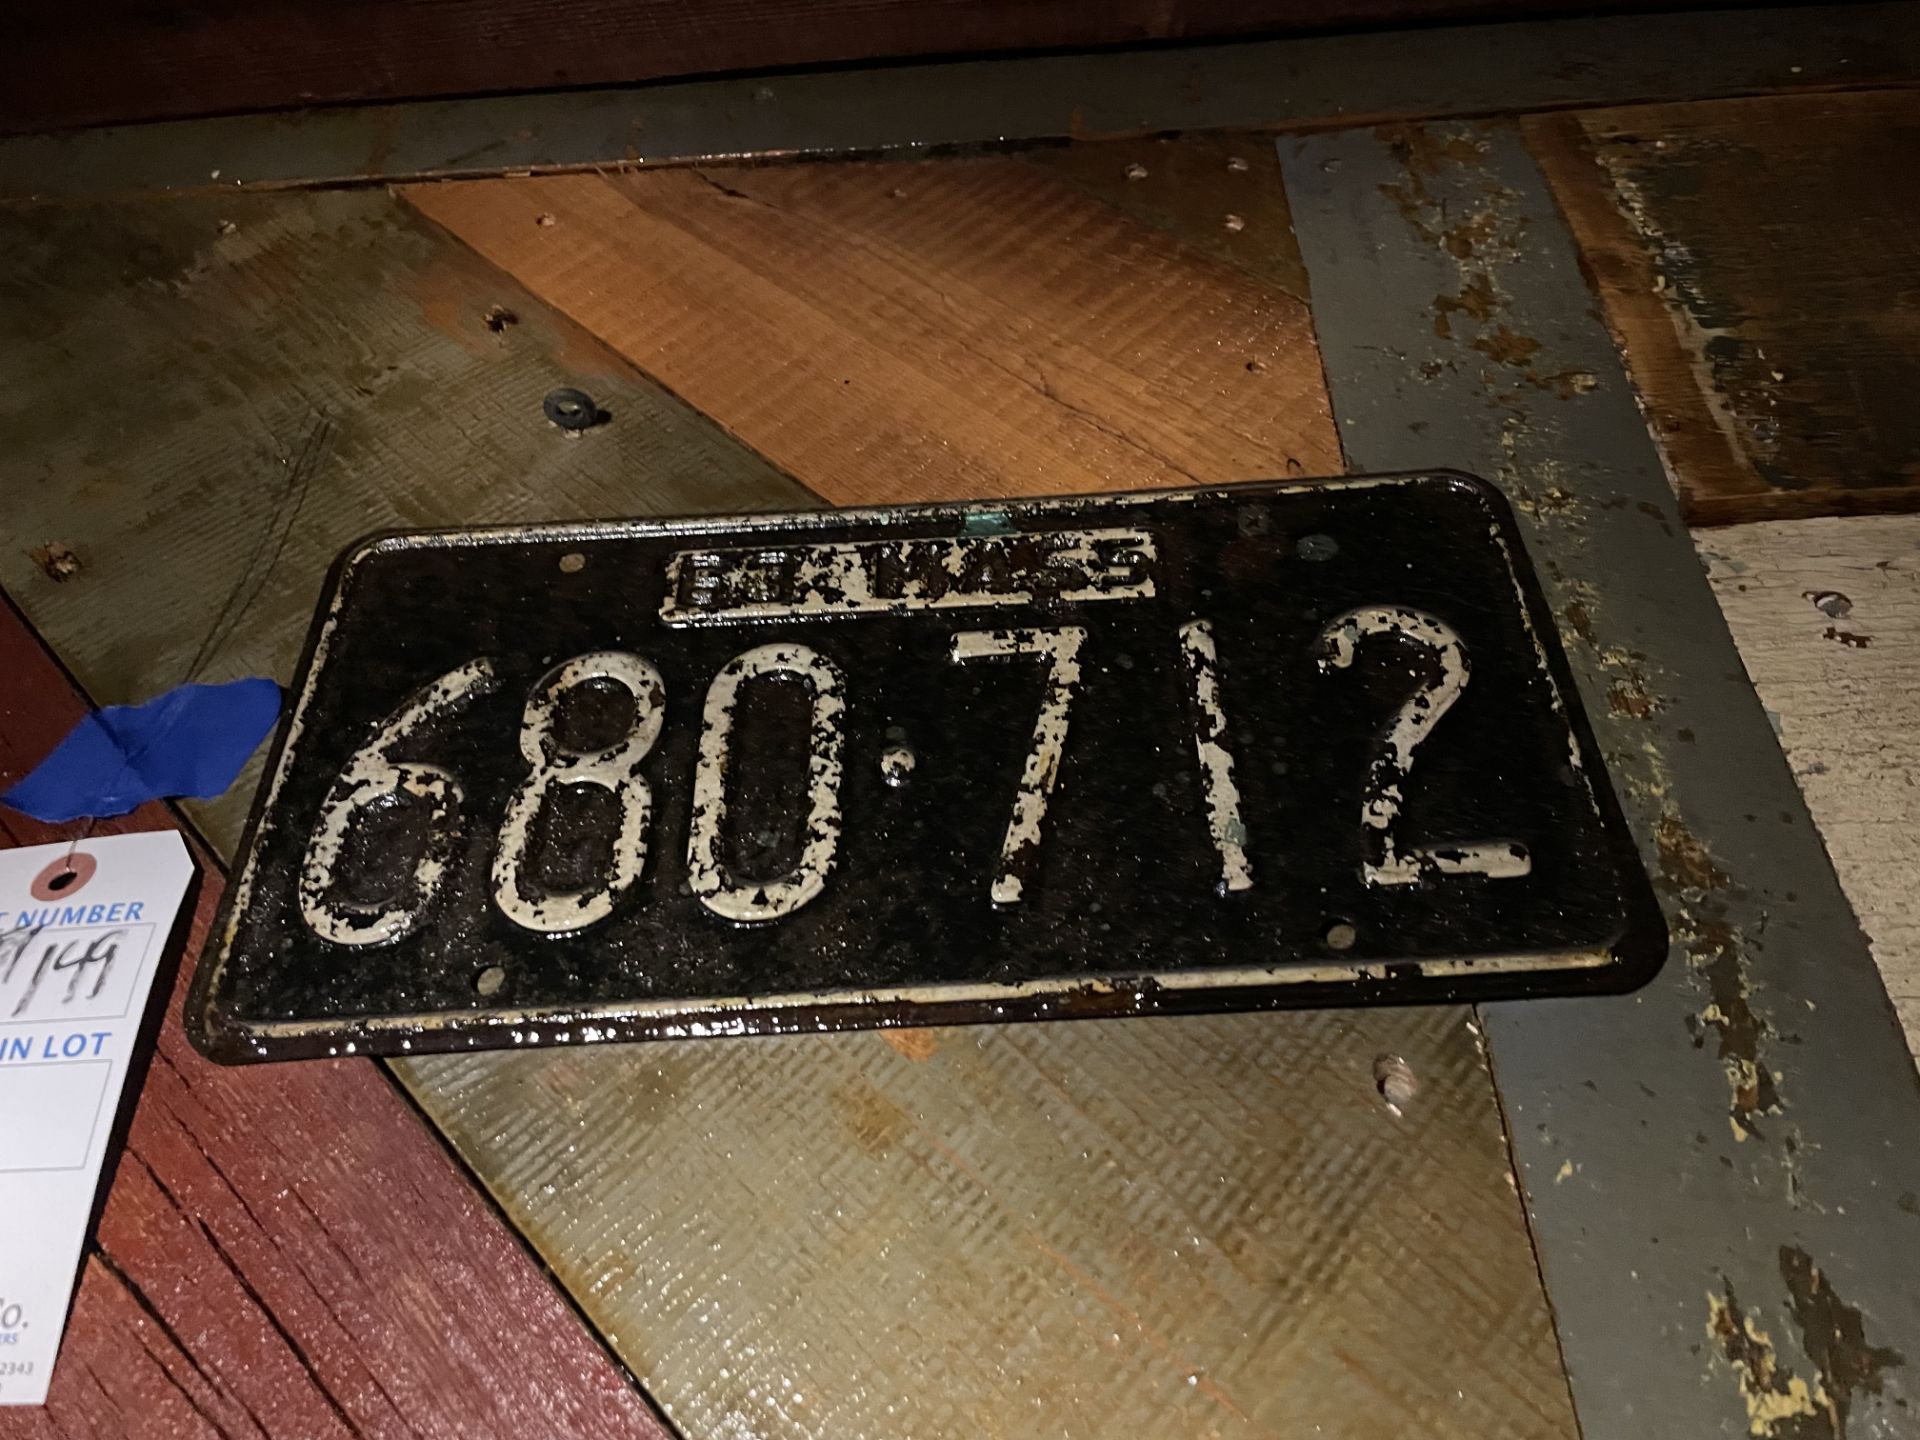 (2) Vintage License Plates - MA 1964 & Other Not Legible